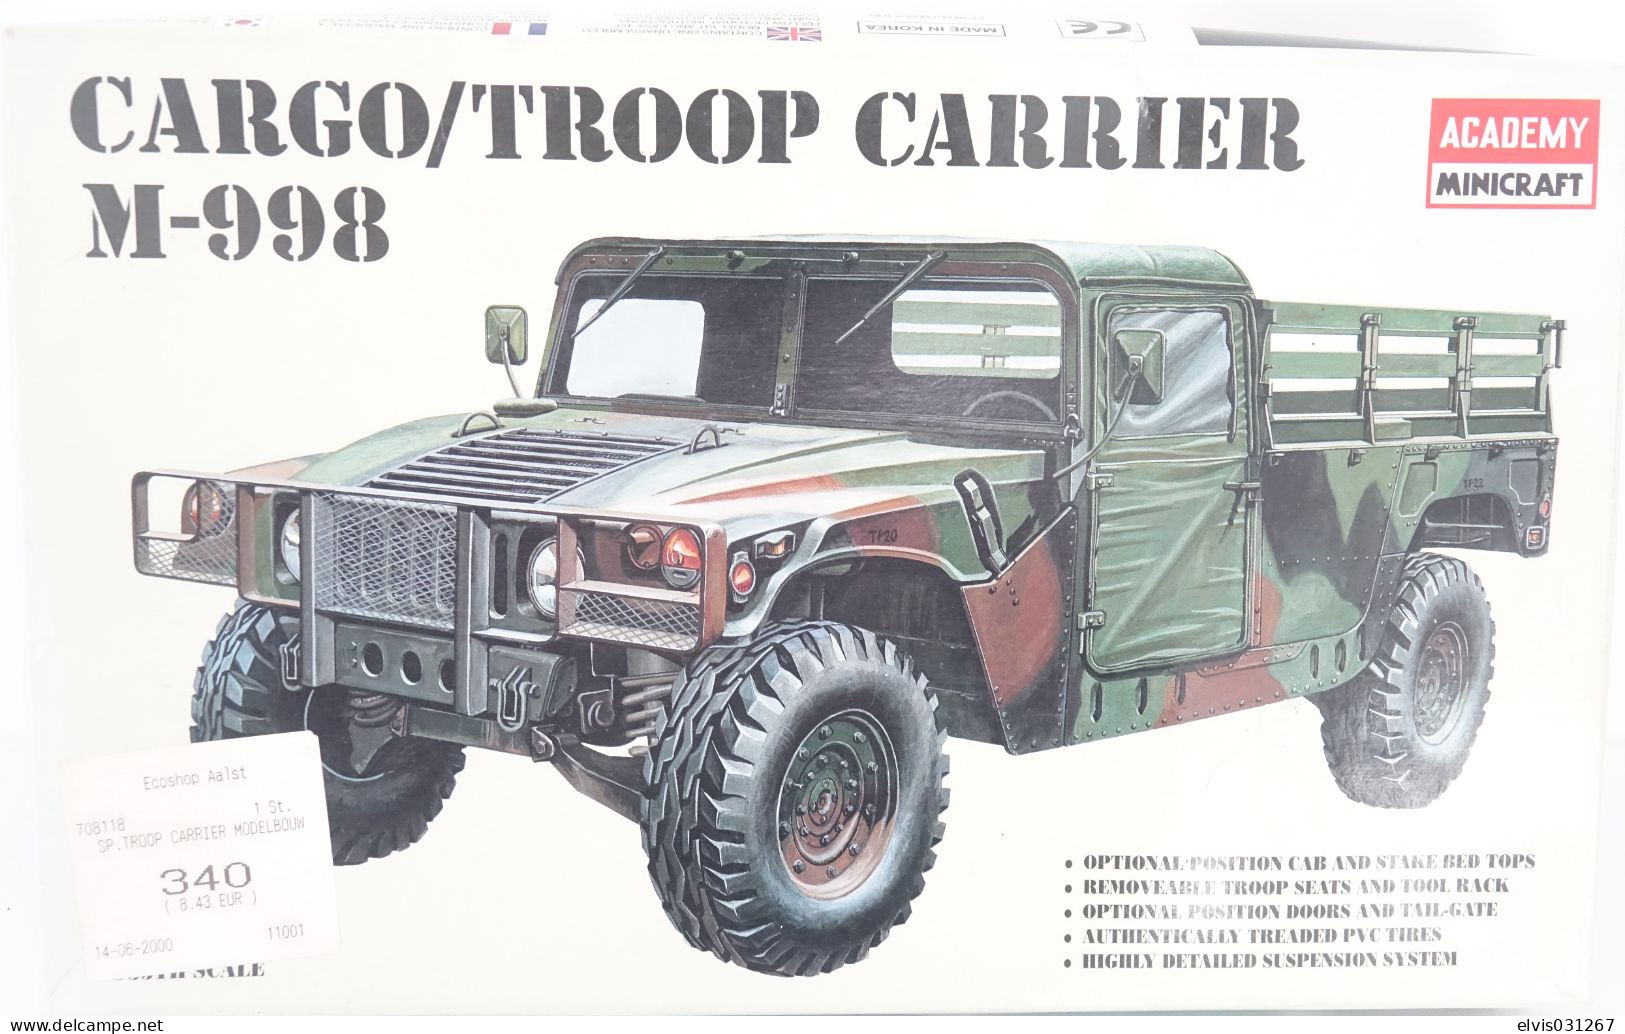 Model Kit - ACADEMY - Cargo Troop Carrier M-998, Scale 1/35, + Original Box - Véhicules Militaires